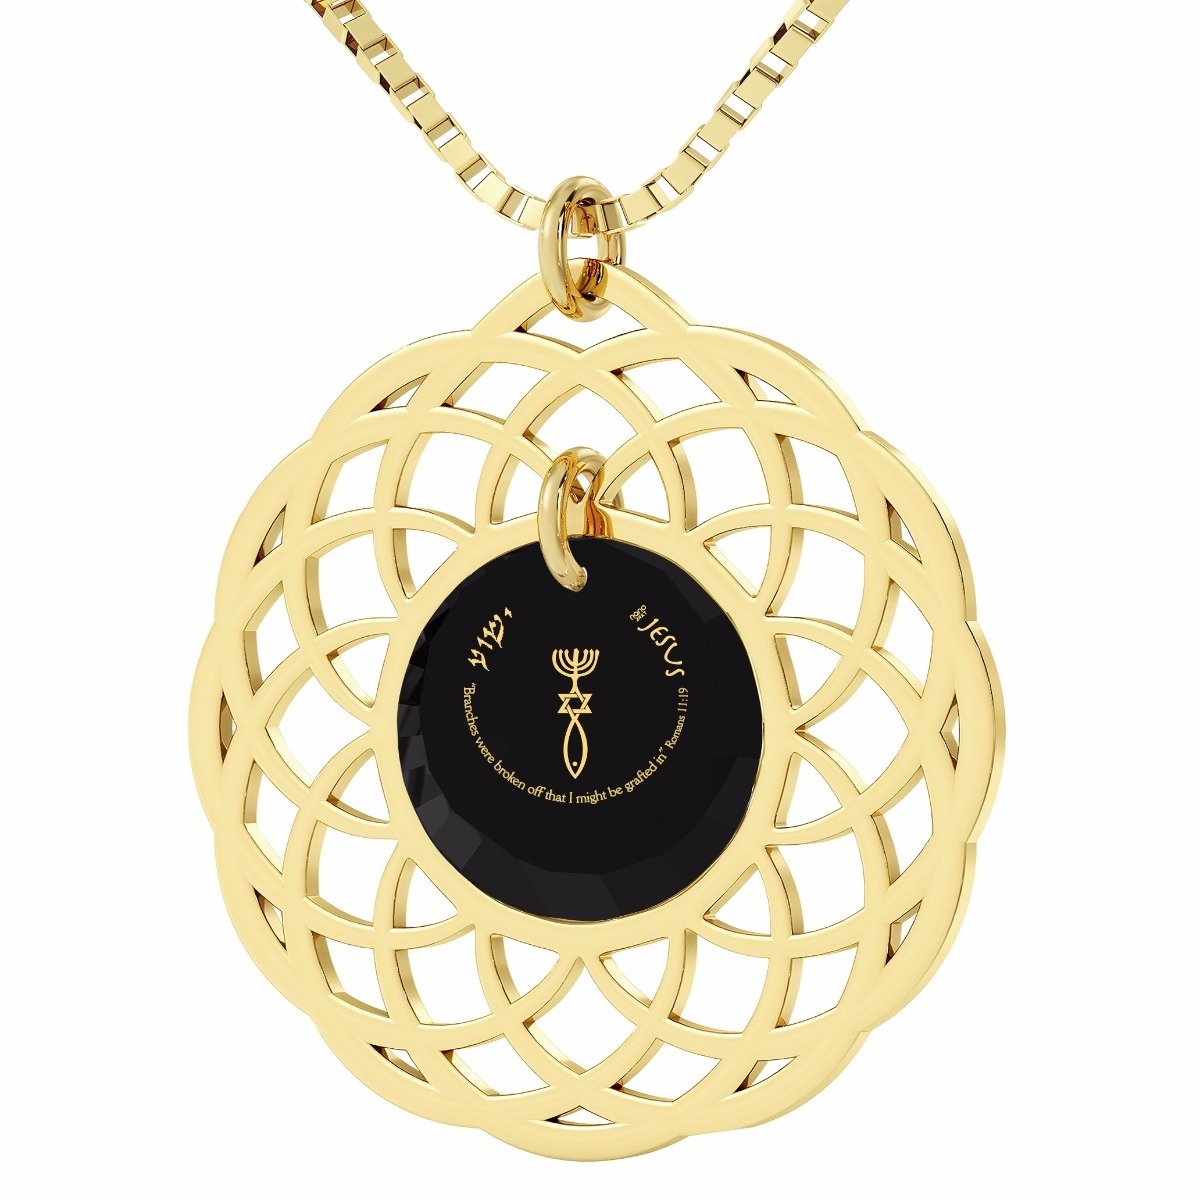 Nano Jewelry 24k Gold Plated & Crystal Grafted-In Mandala Necklace with 24k Gold Micro-Inscription (Black) - 1